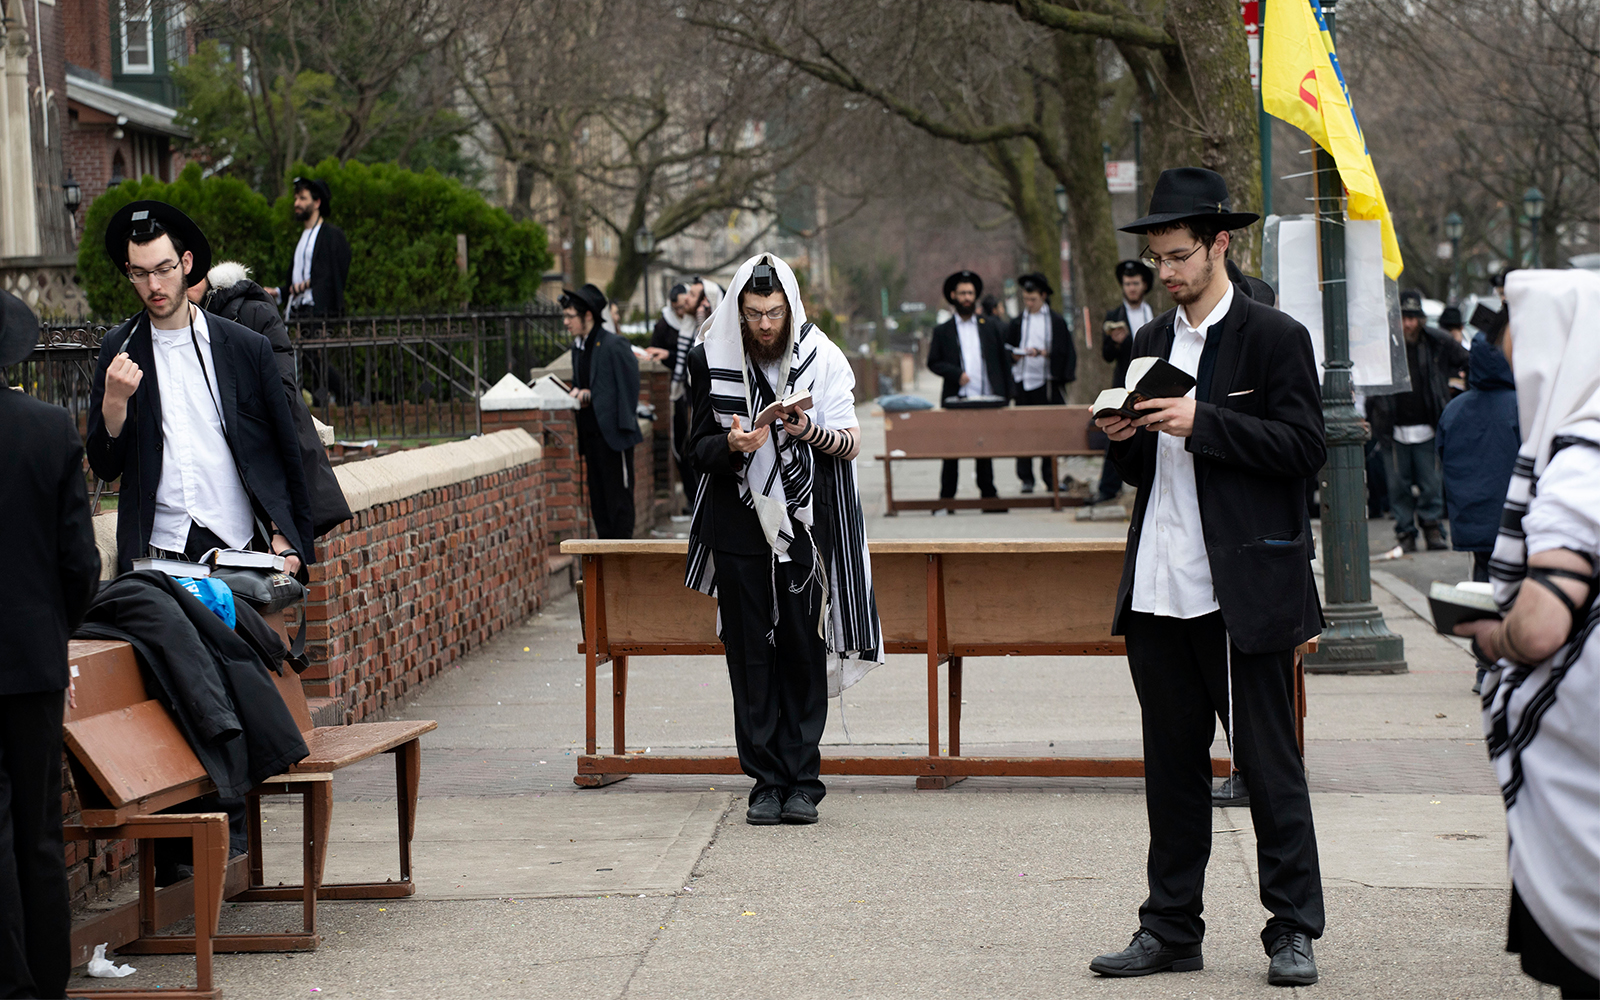 Ultra-Orthodox Jewish men use social distancing as they pray outside the Chabad Lubavitch World Headquarters, in Brooklyn, New York, March 20, 2020. (AP/Mark Lennihan)